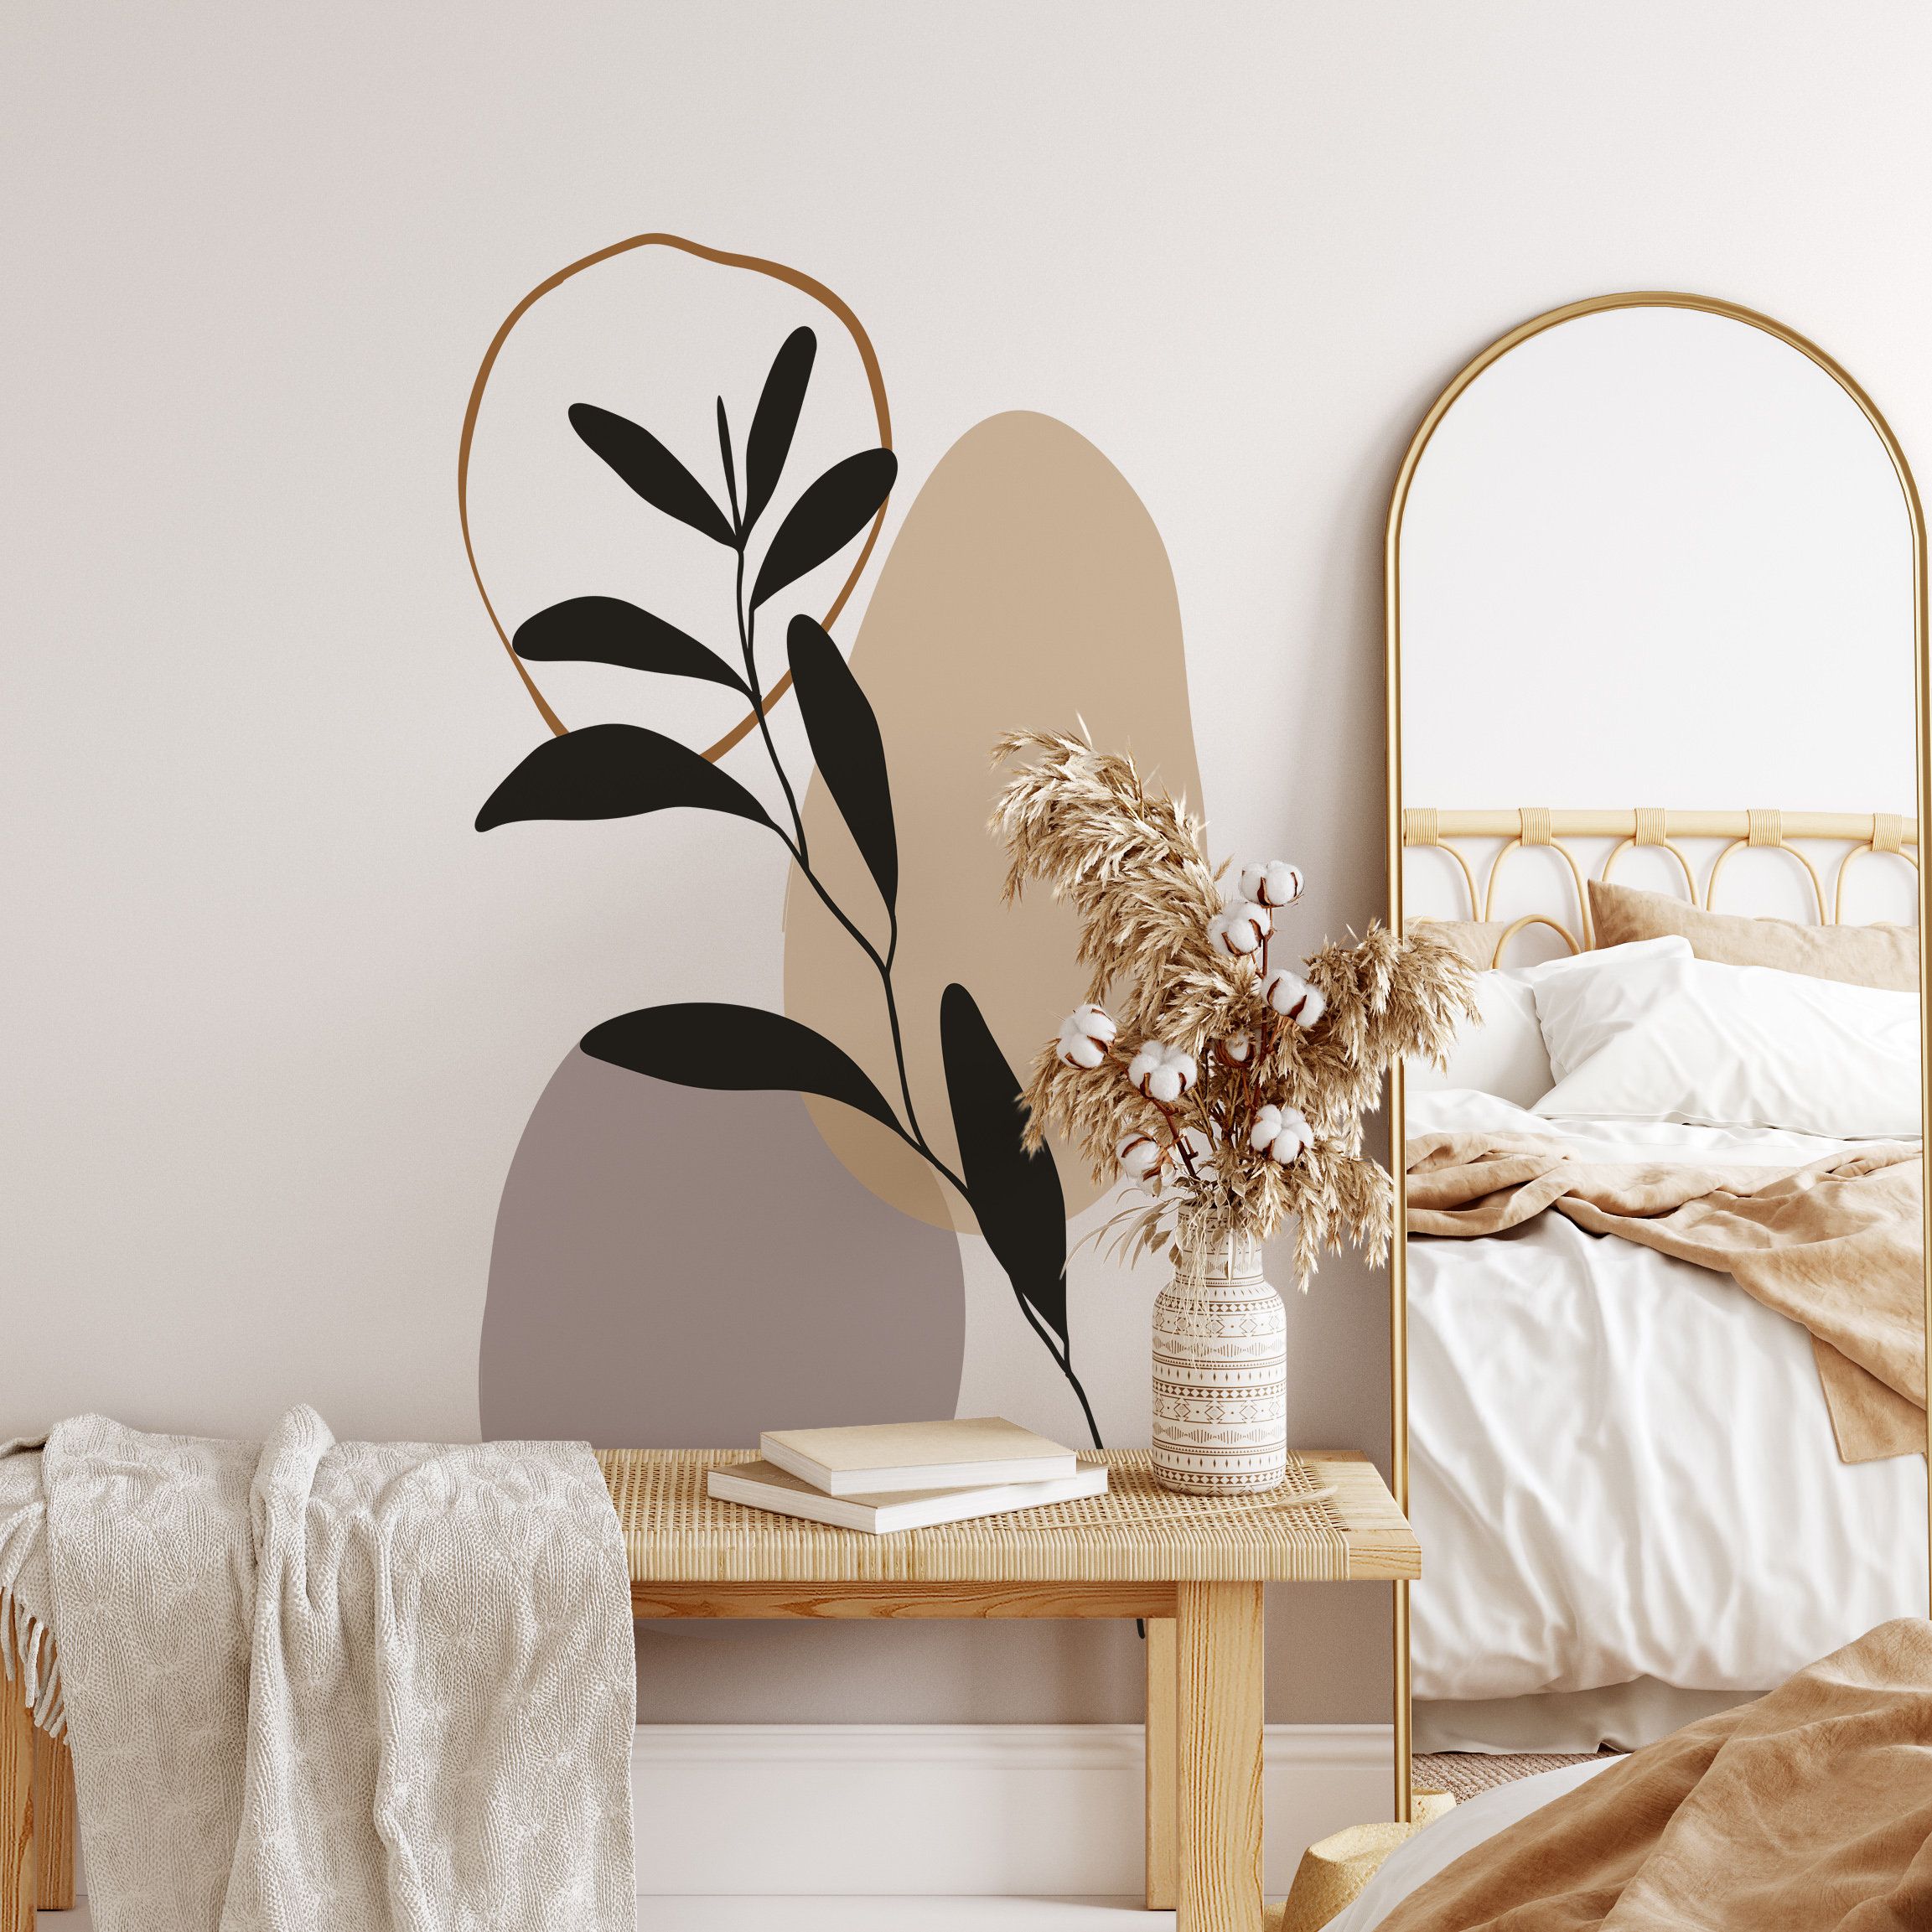 Transform Your Space with Removable Vinyl Wall Decals